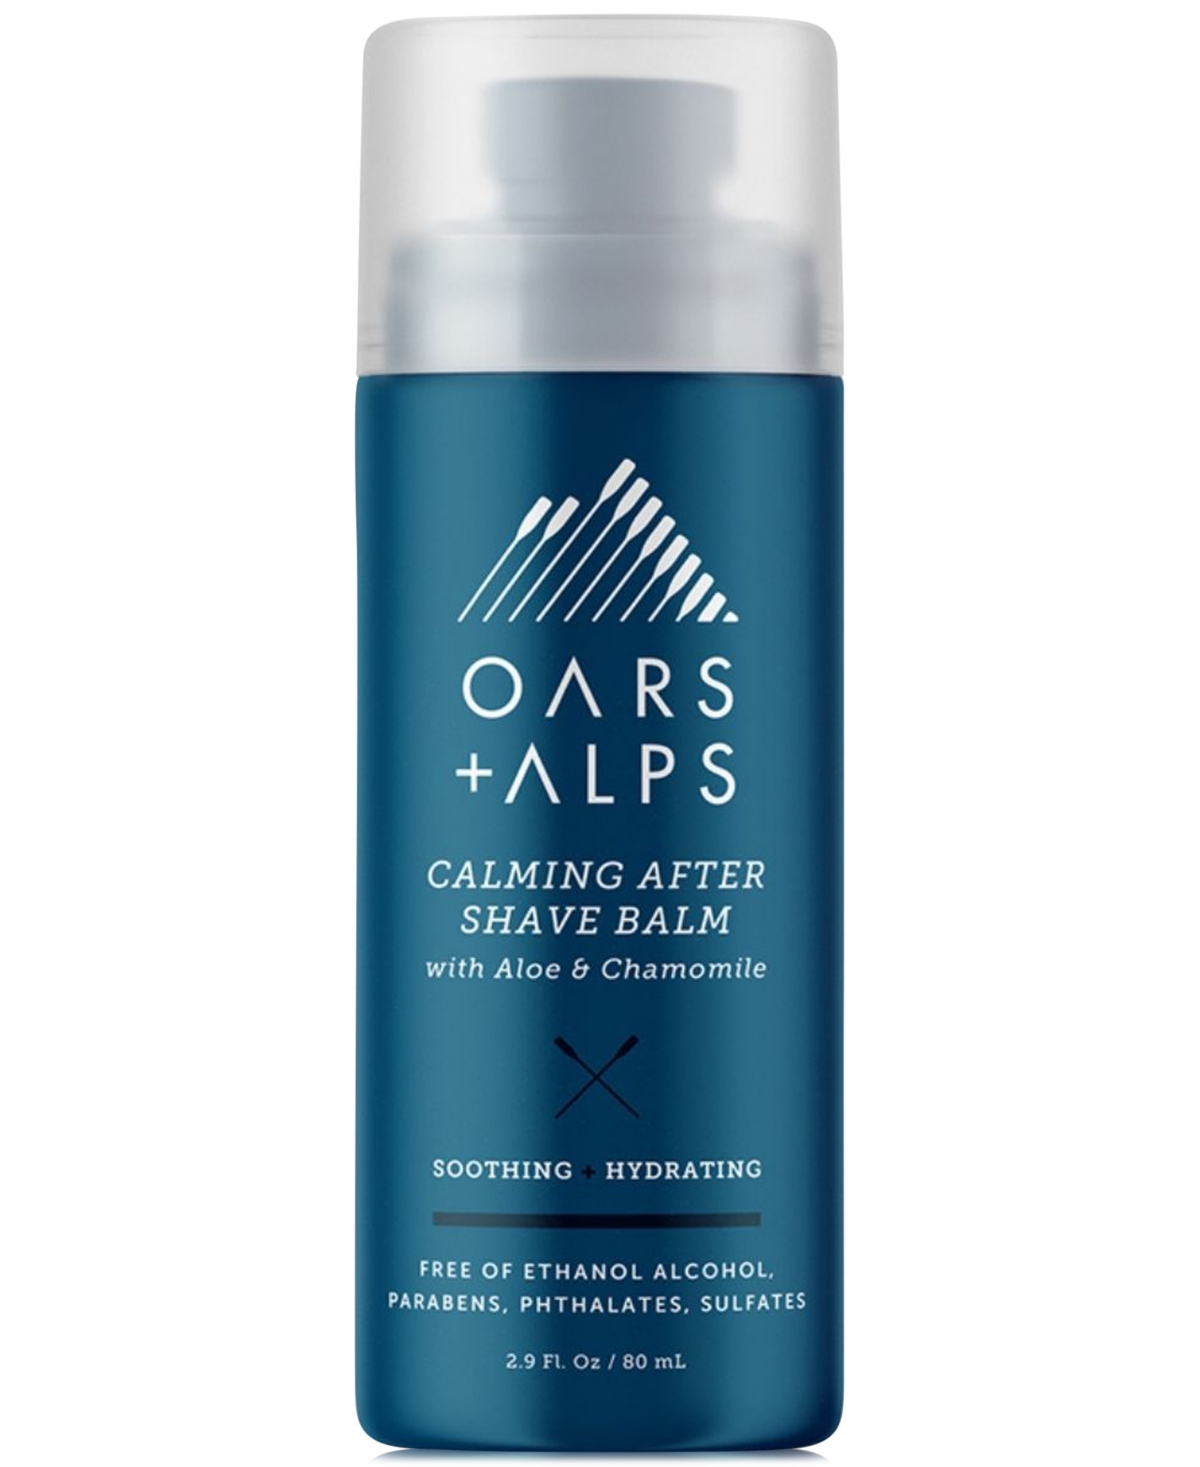 Calming After Shave Balm, 2.9oz